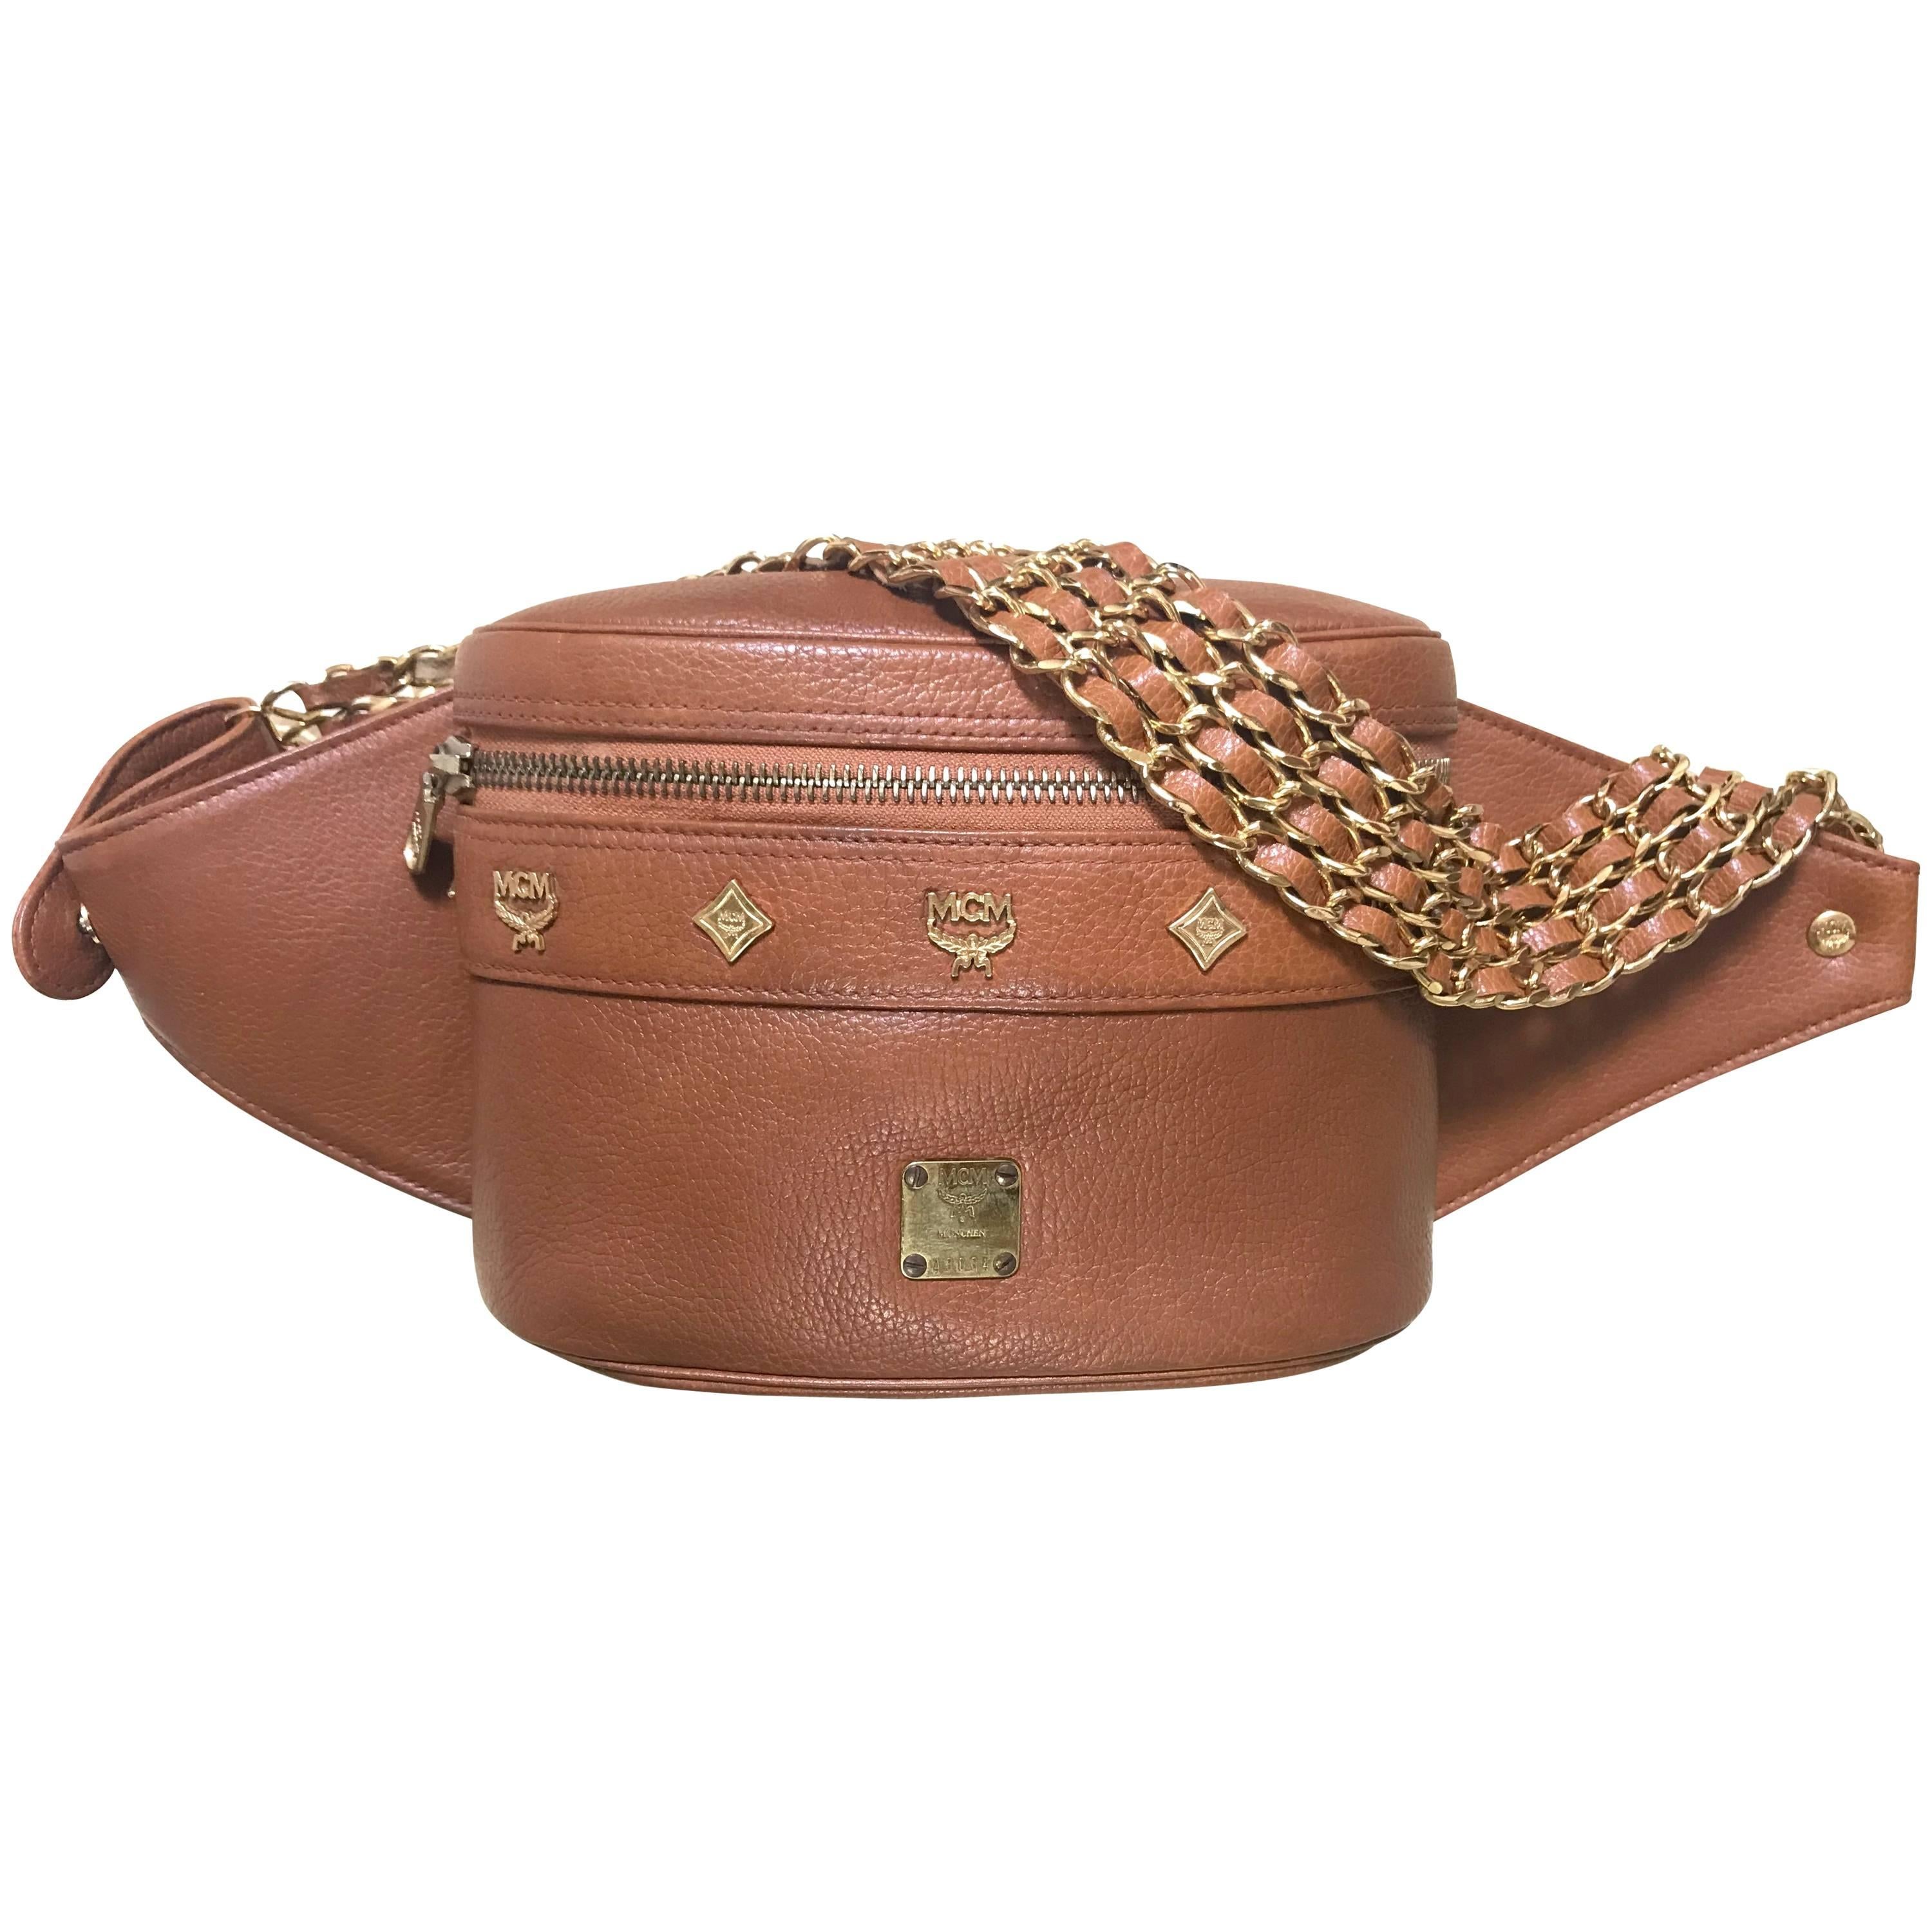 Vintage MCM brown fanny pack with multiple layer golden chain belt. Unisex purse